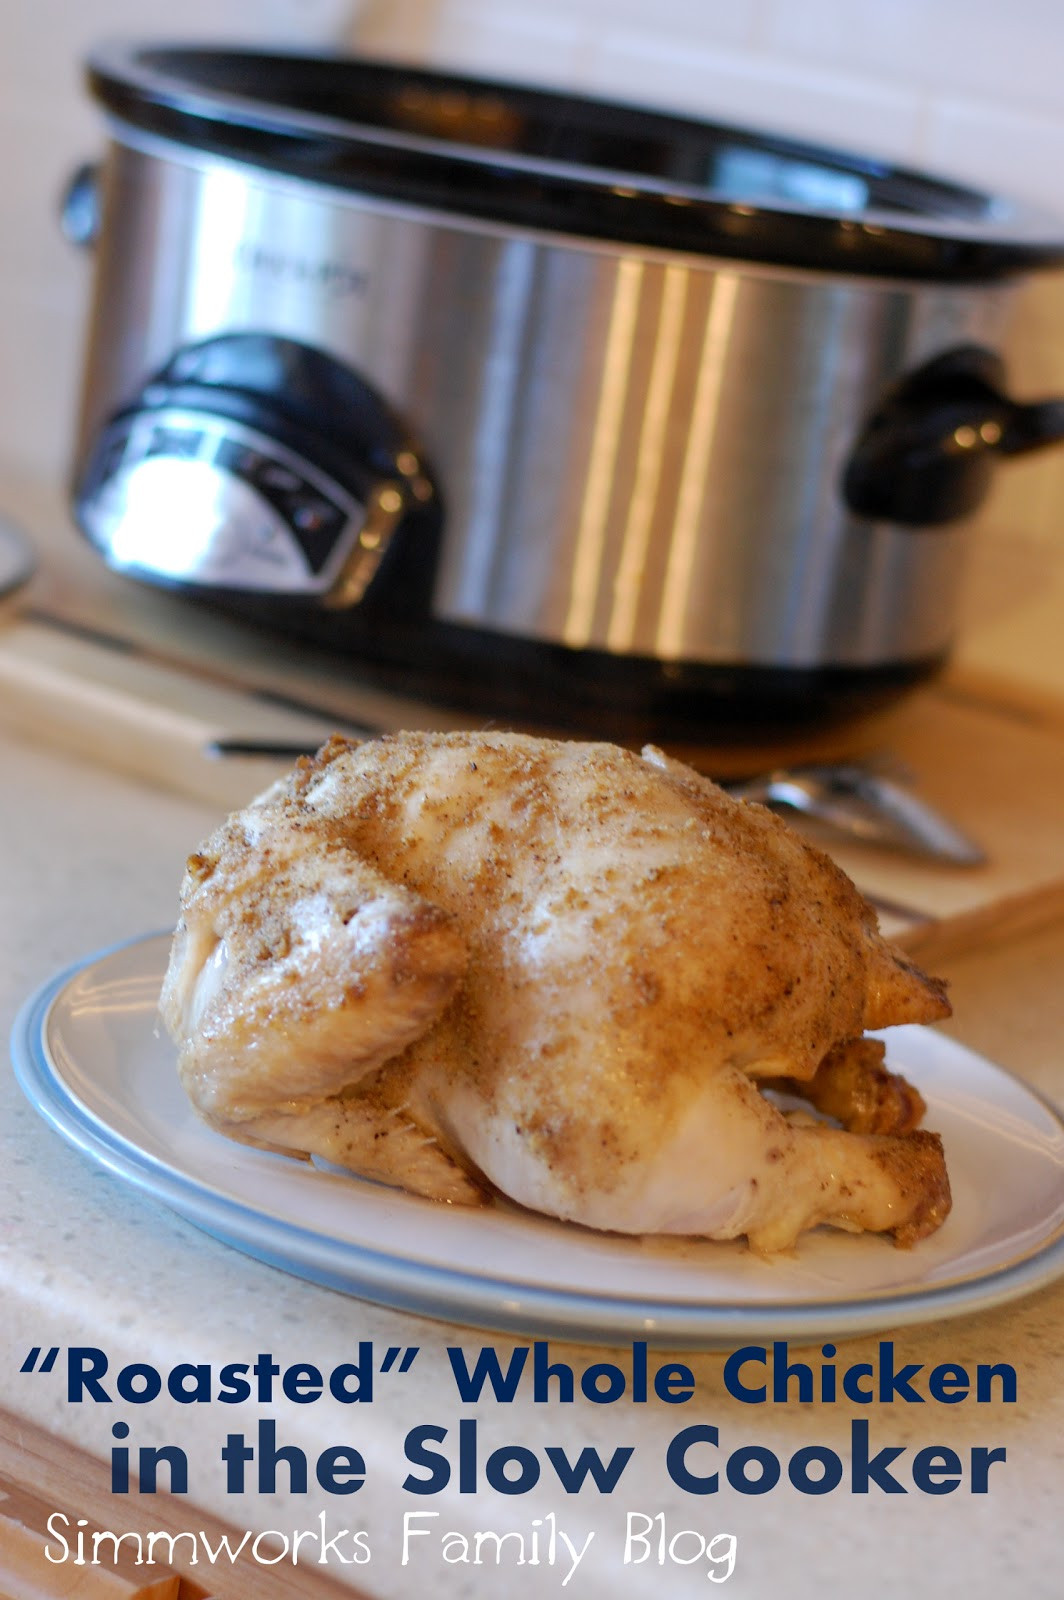 Whole Chicken Recipes Slow Cooker
 "Roasted" Whole Chicken Slow Cooker Dinner Recipe A